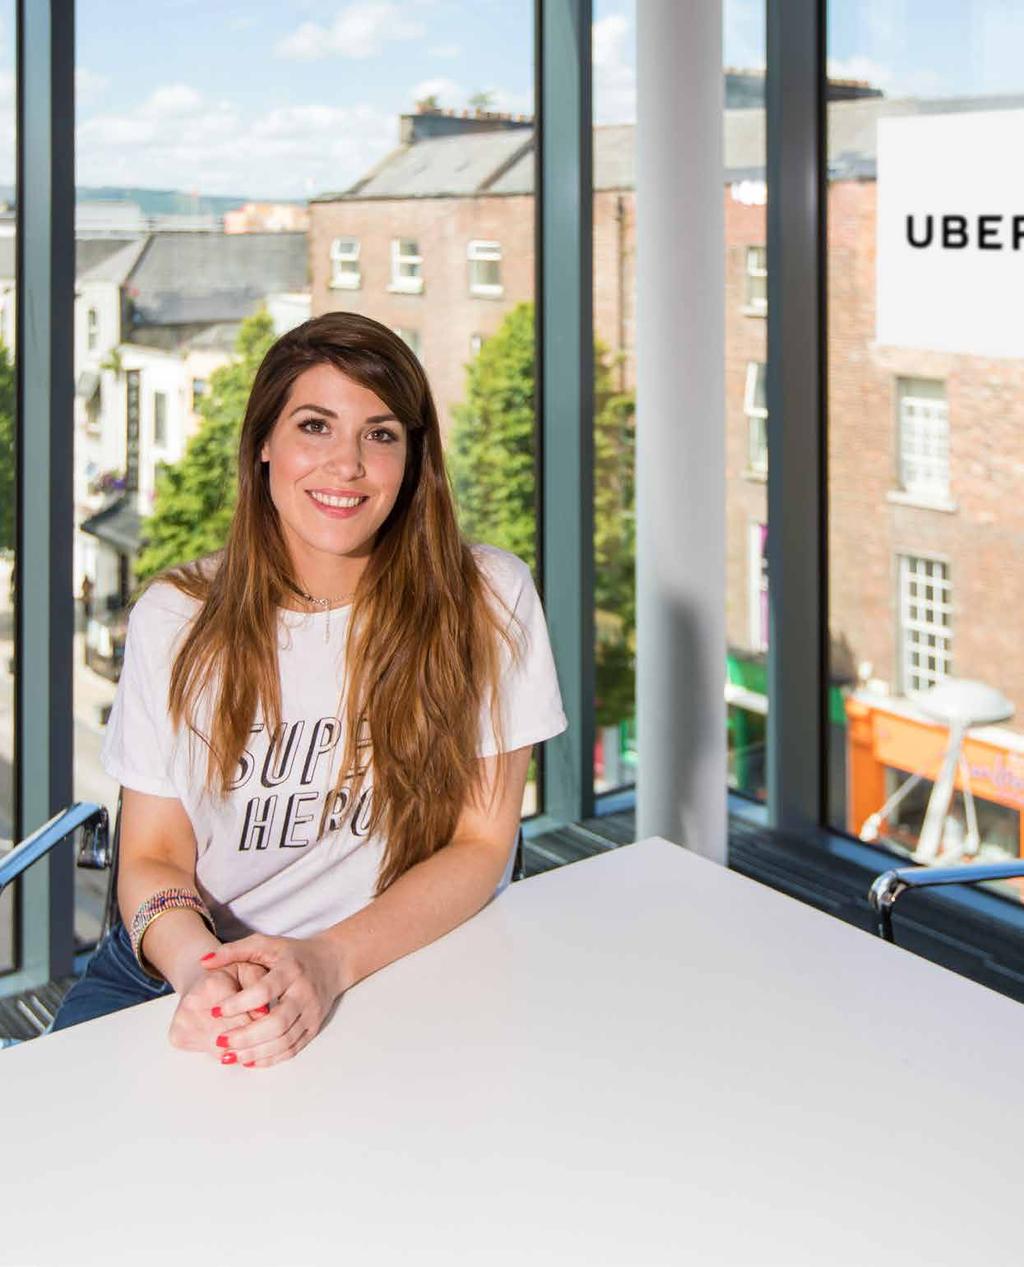 Marie Aimee Giard Team Leader, Uber, Limerick Moving to Ireland from France was an important decision for me professionally.